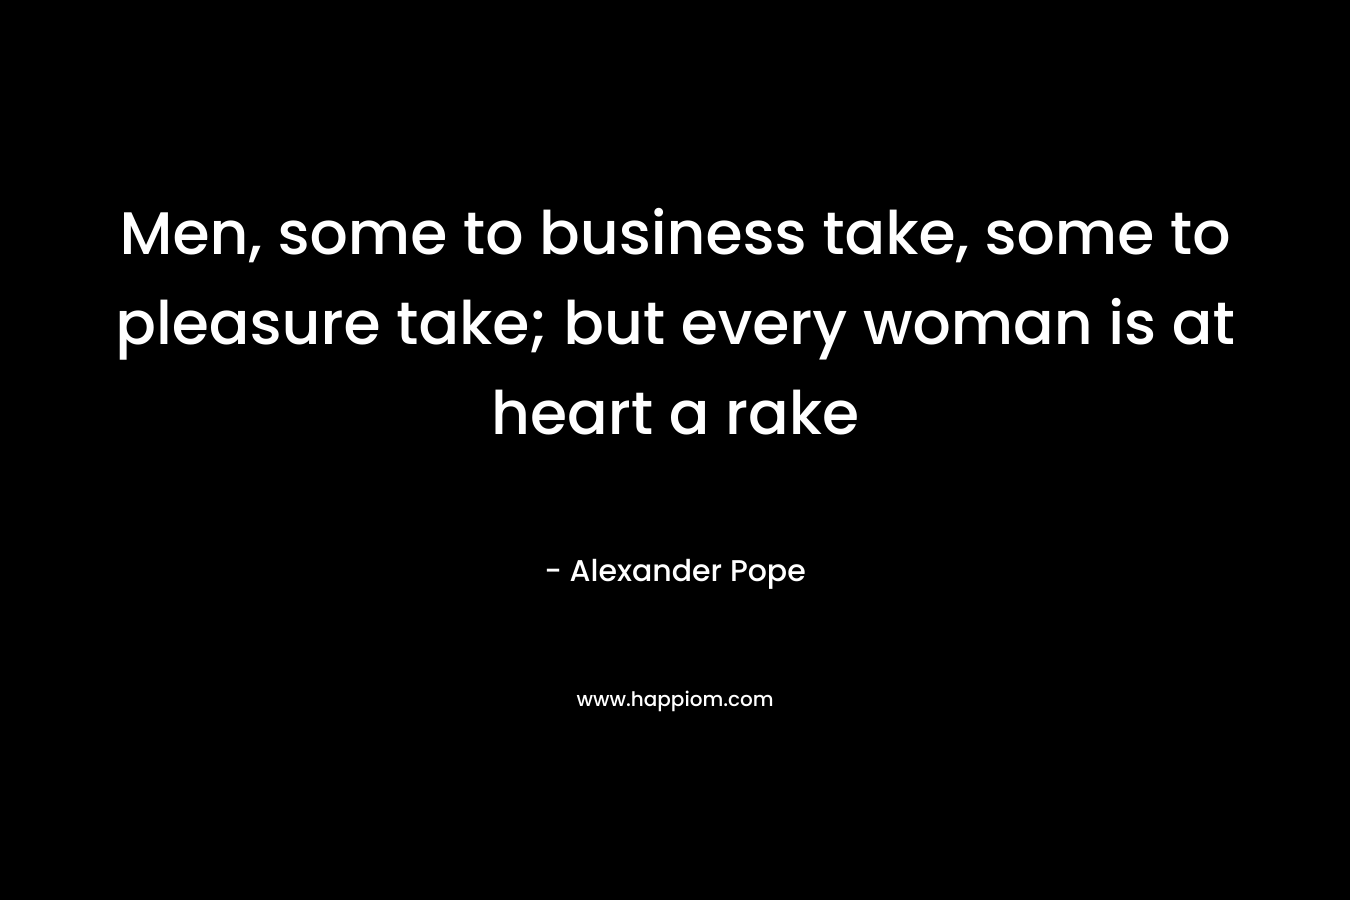 Men, some to business take, some to pleasure take; but every woman is at heart a rake – Alexander Pope